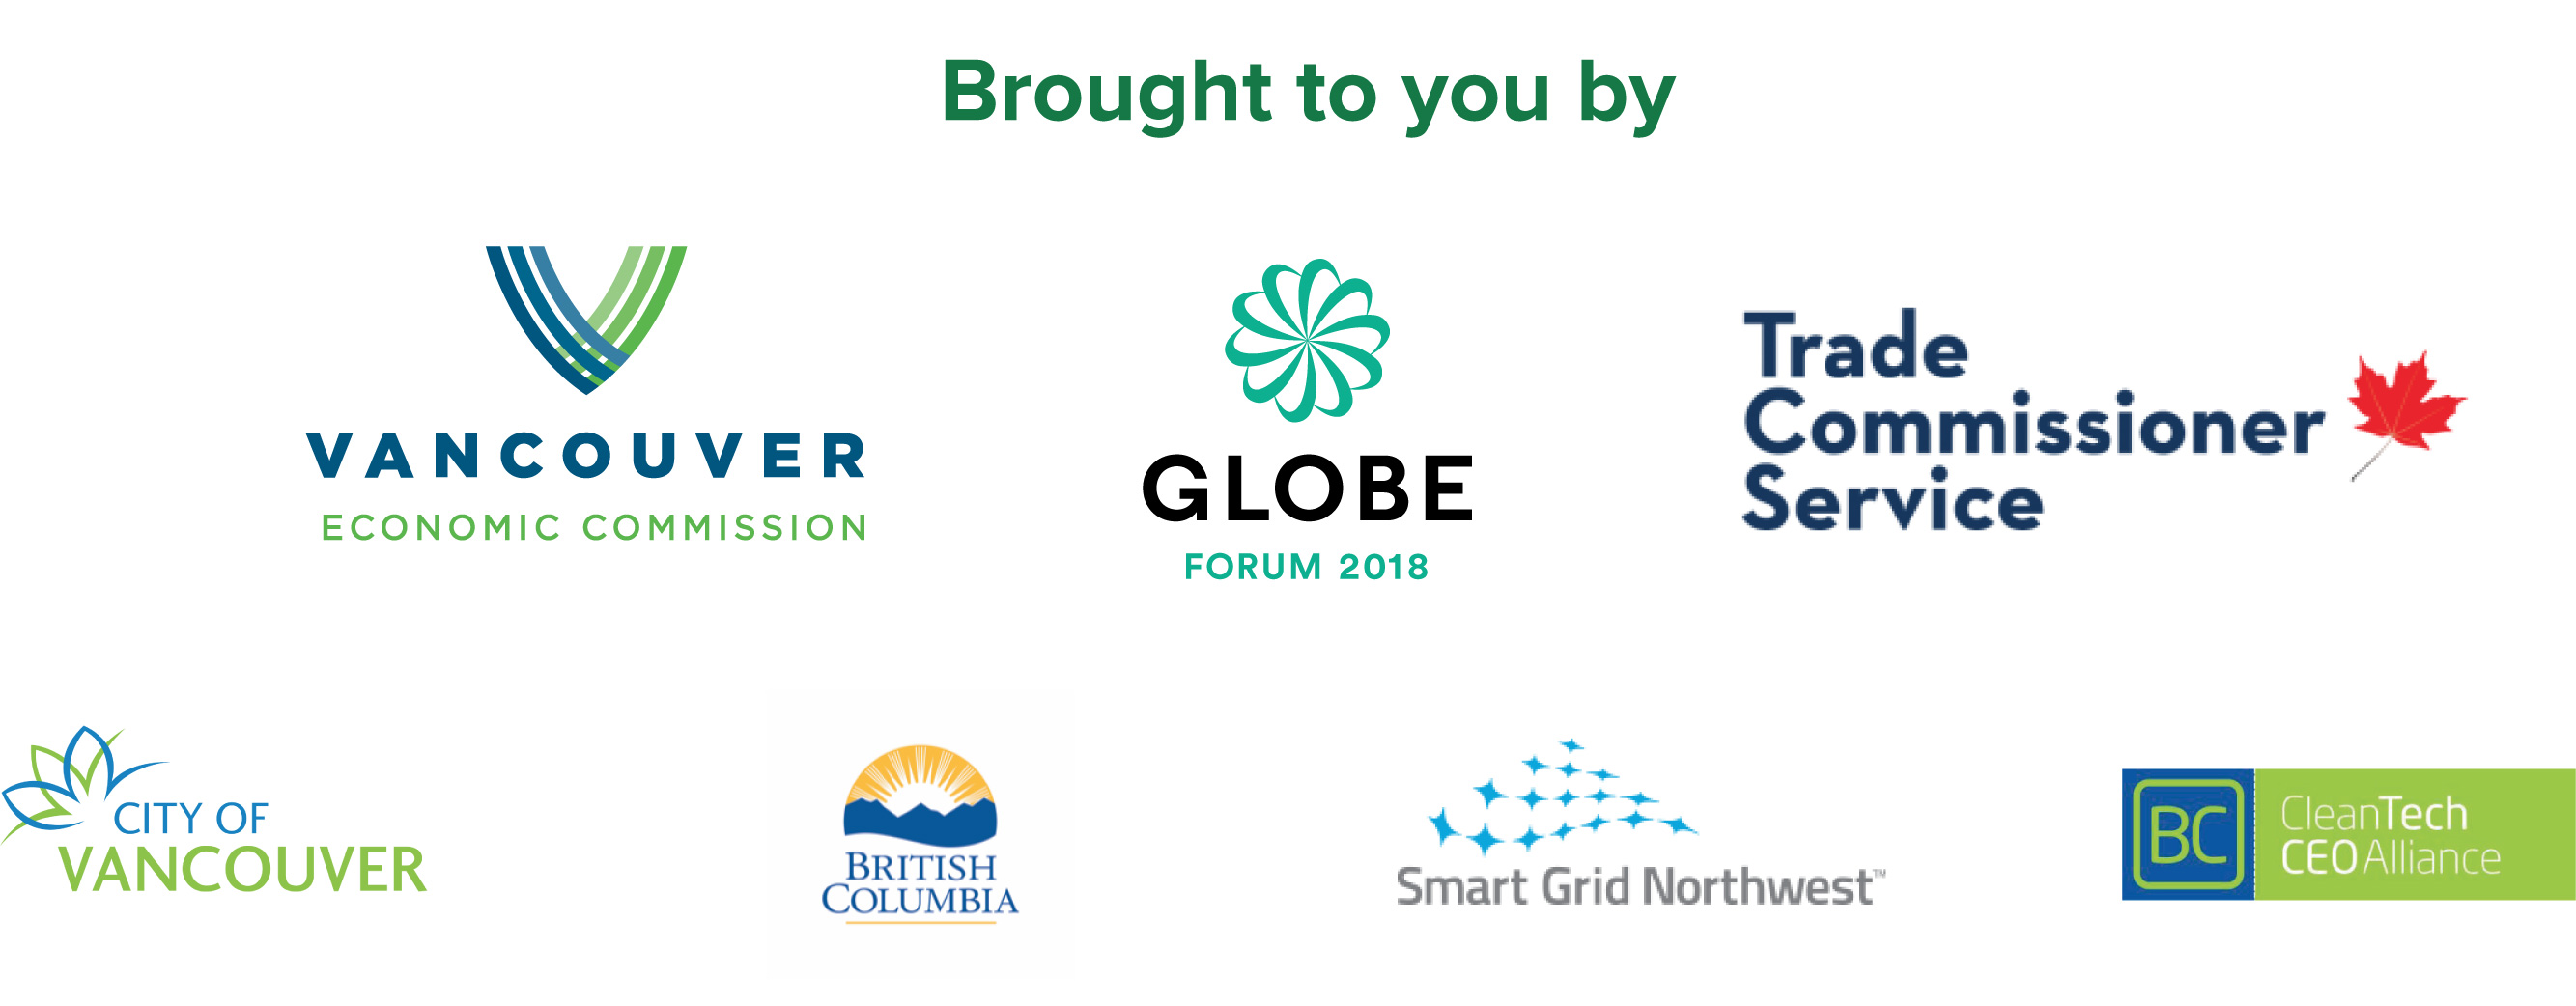 Cascadia Connect is organized and led by the Vancouver Economic Commission with support from our partners, including the City of Vancouver, Global Affairs Canada, SmartGrid Northwest, the BC Cleantech CEO Alliance, and the GLOBE Forum.